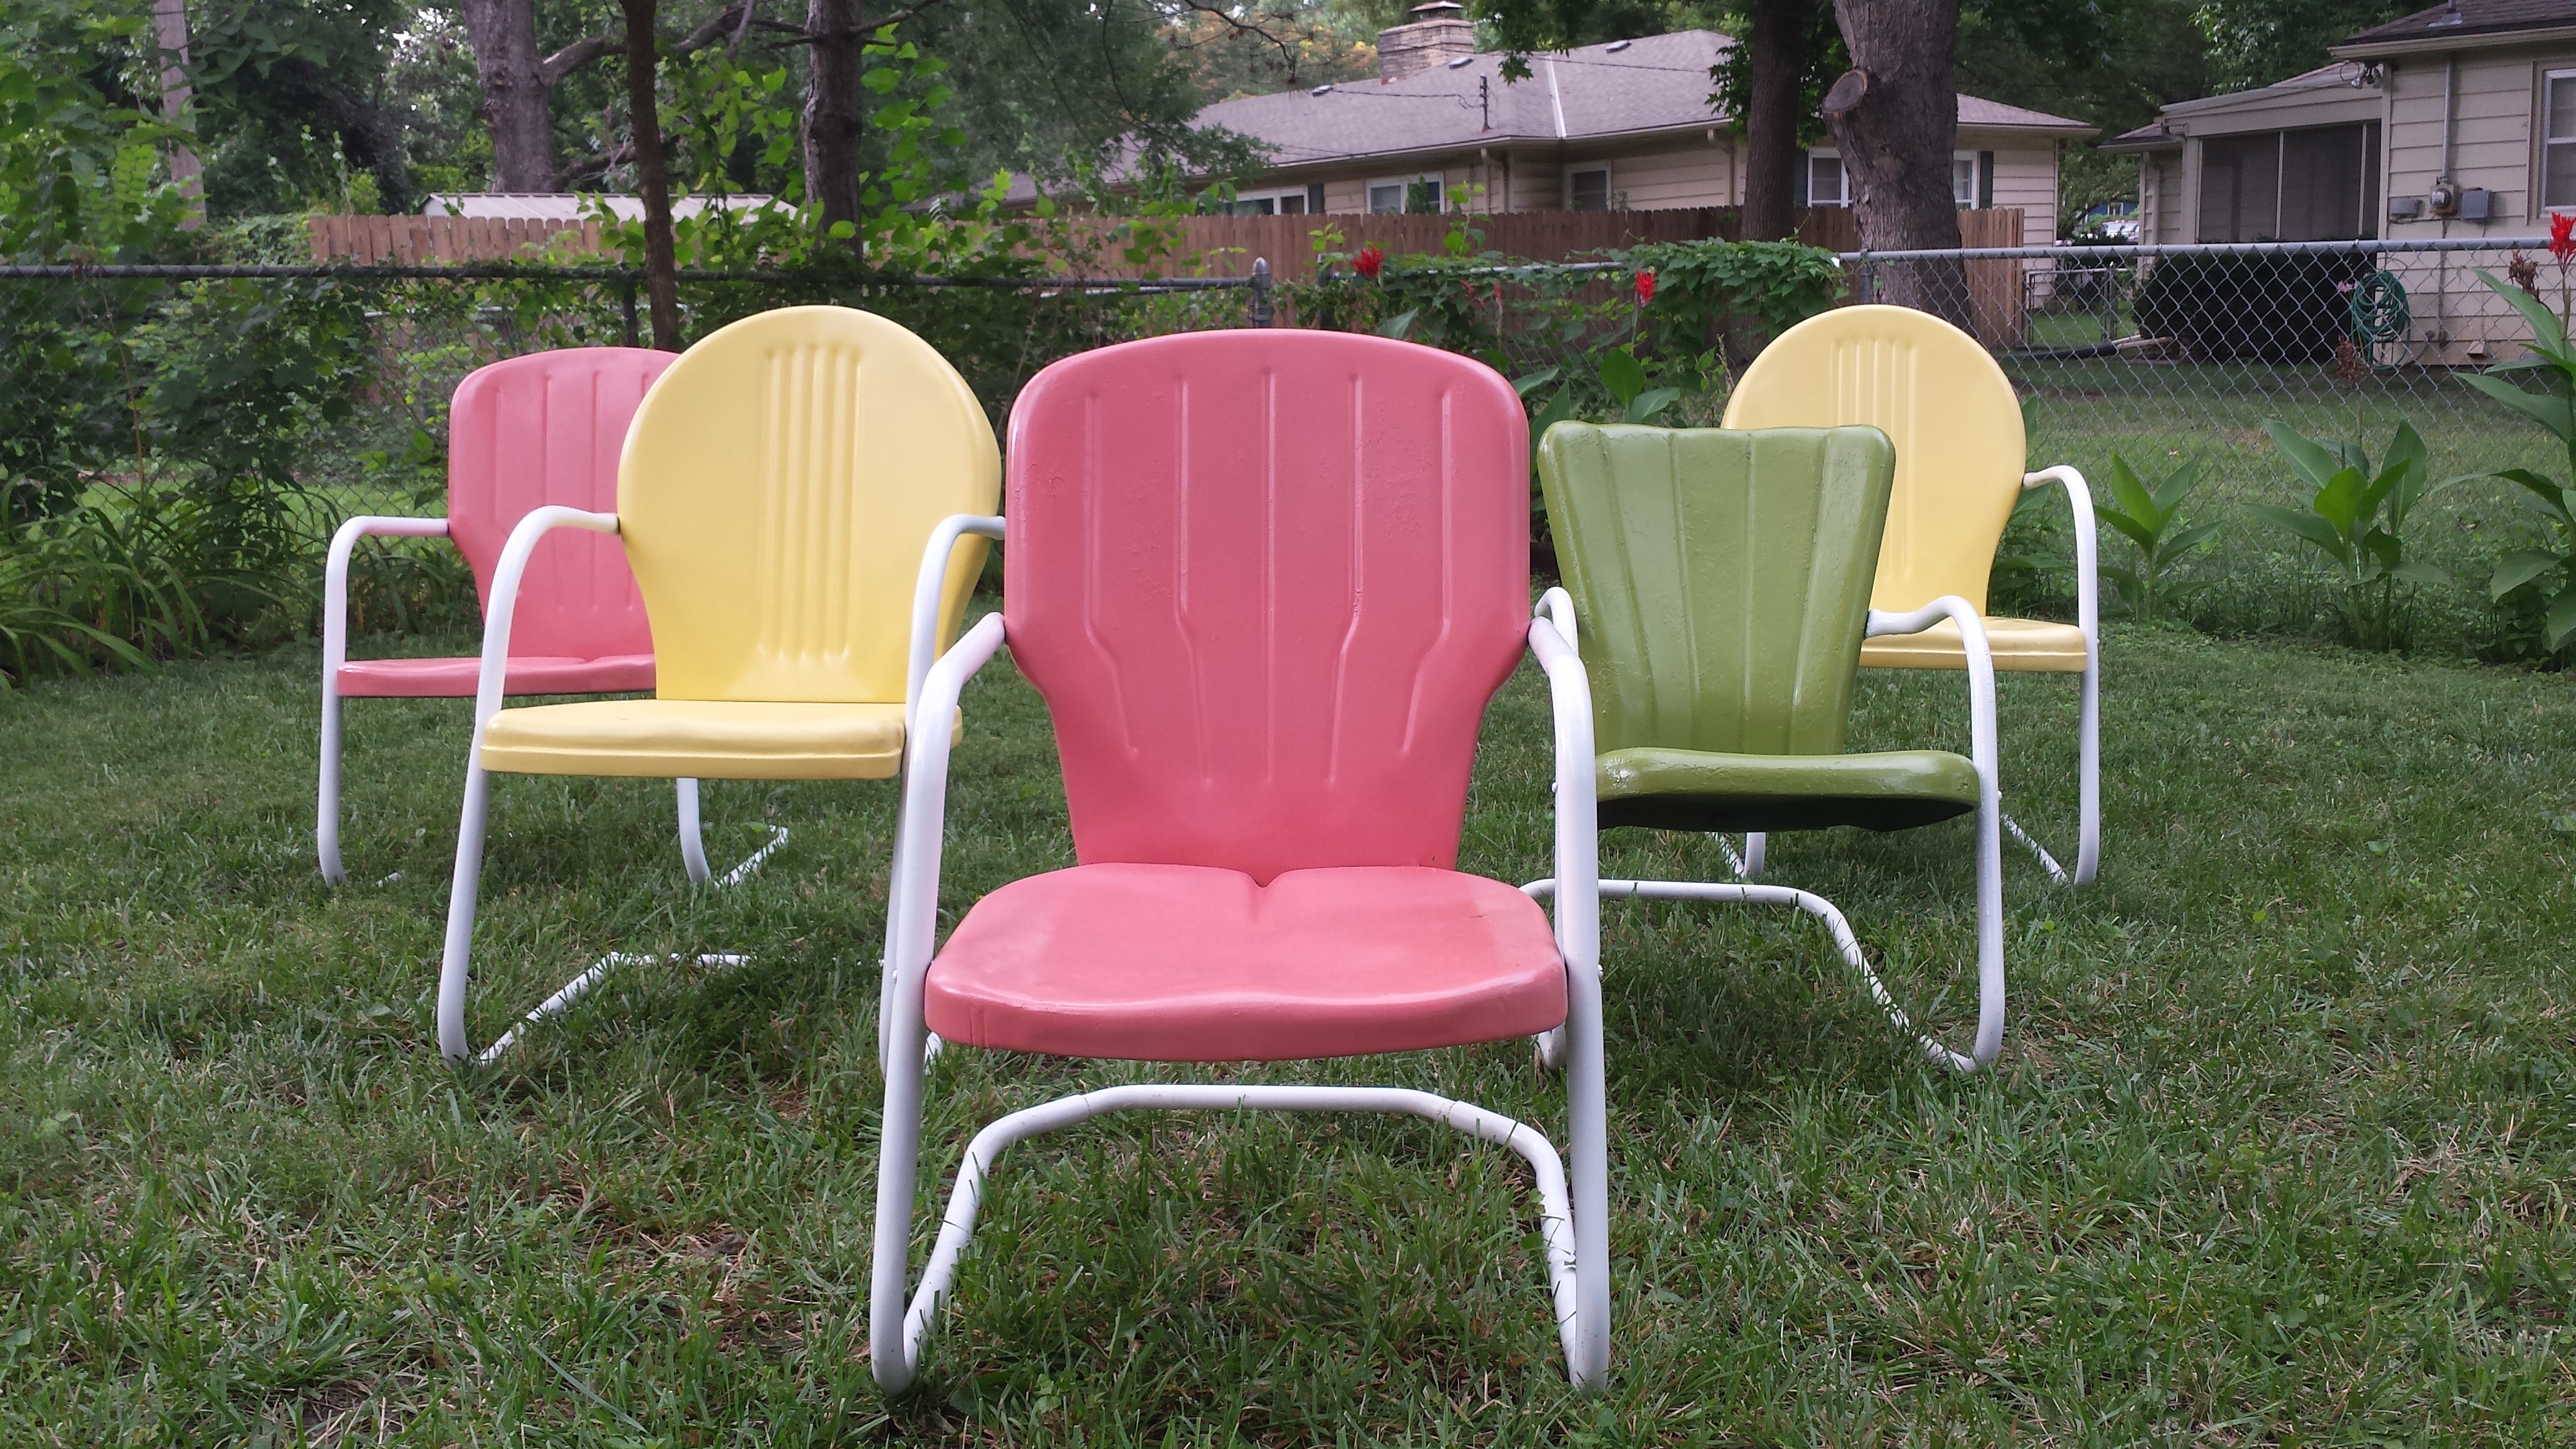 The Metal Lawn Chair What Every Mid Century Modern Enthusiast